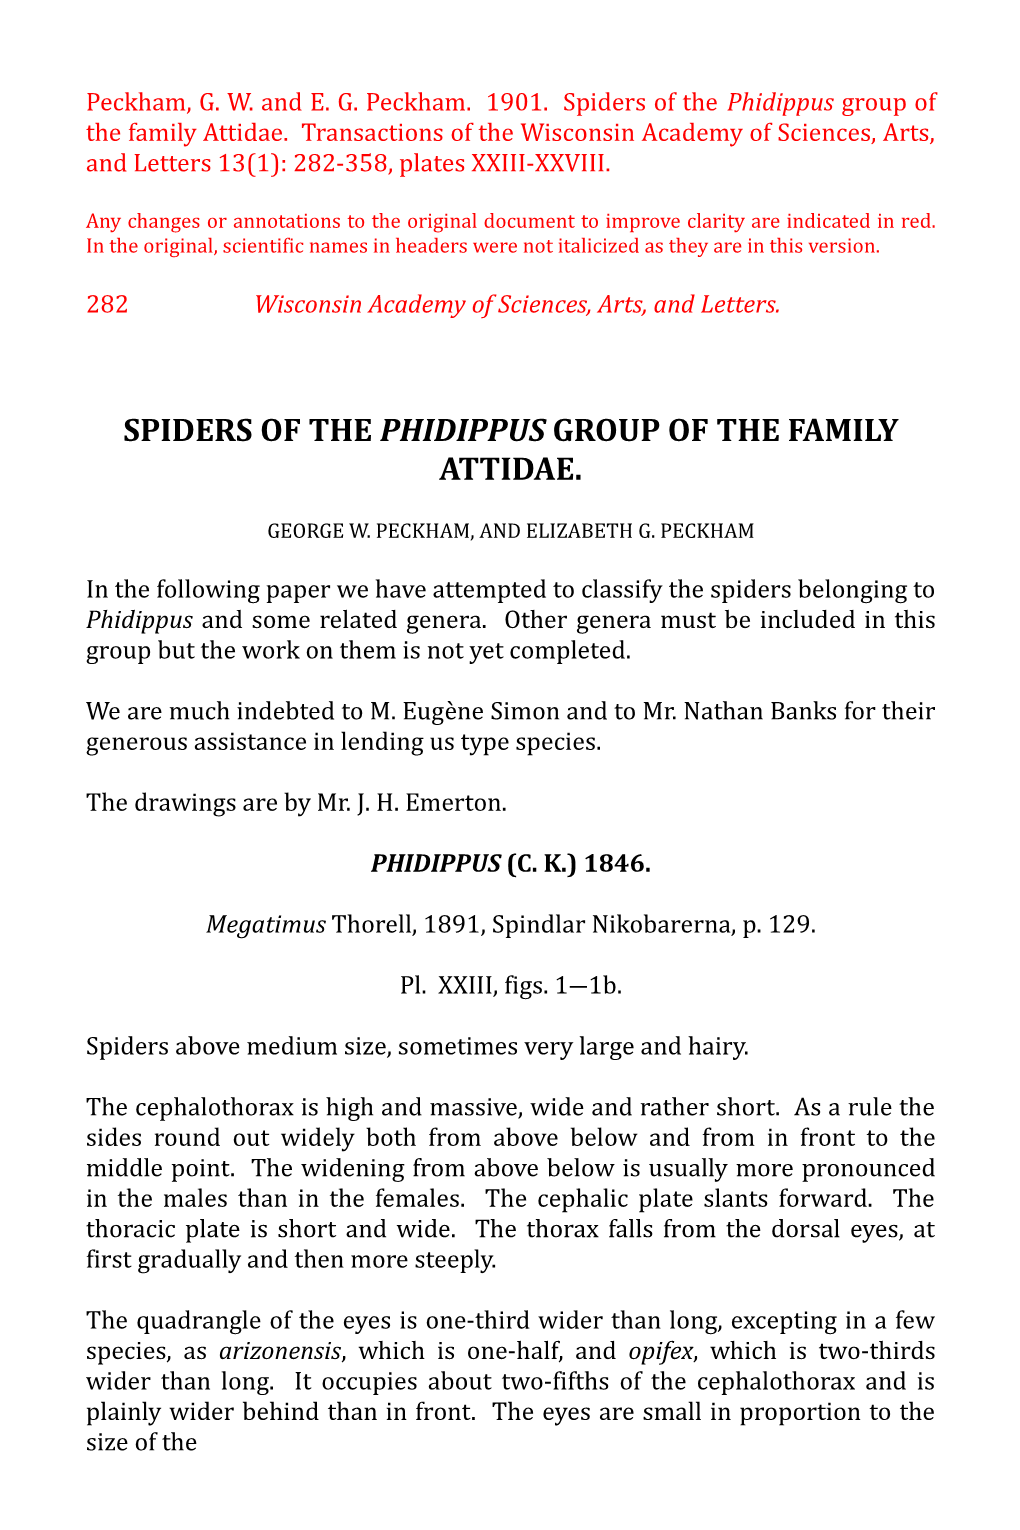 Spiders of the Phidippus Group of the Family Attidae. Transactions of the Wisconsin Academy of Sciences, Arts, and Letters 13(1): 282-358, Plates XXIII-XXVIII